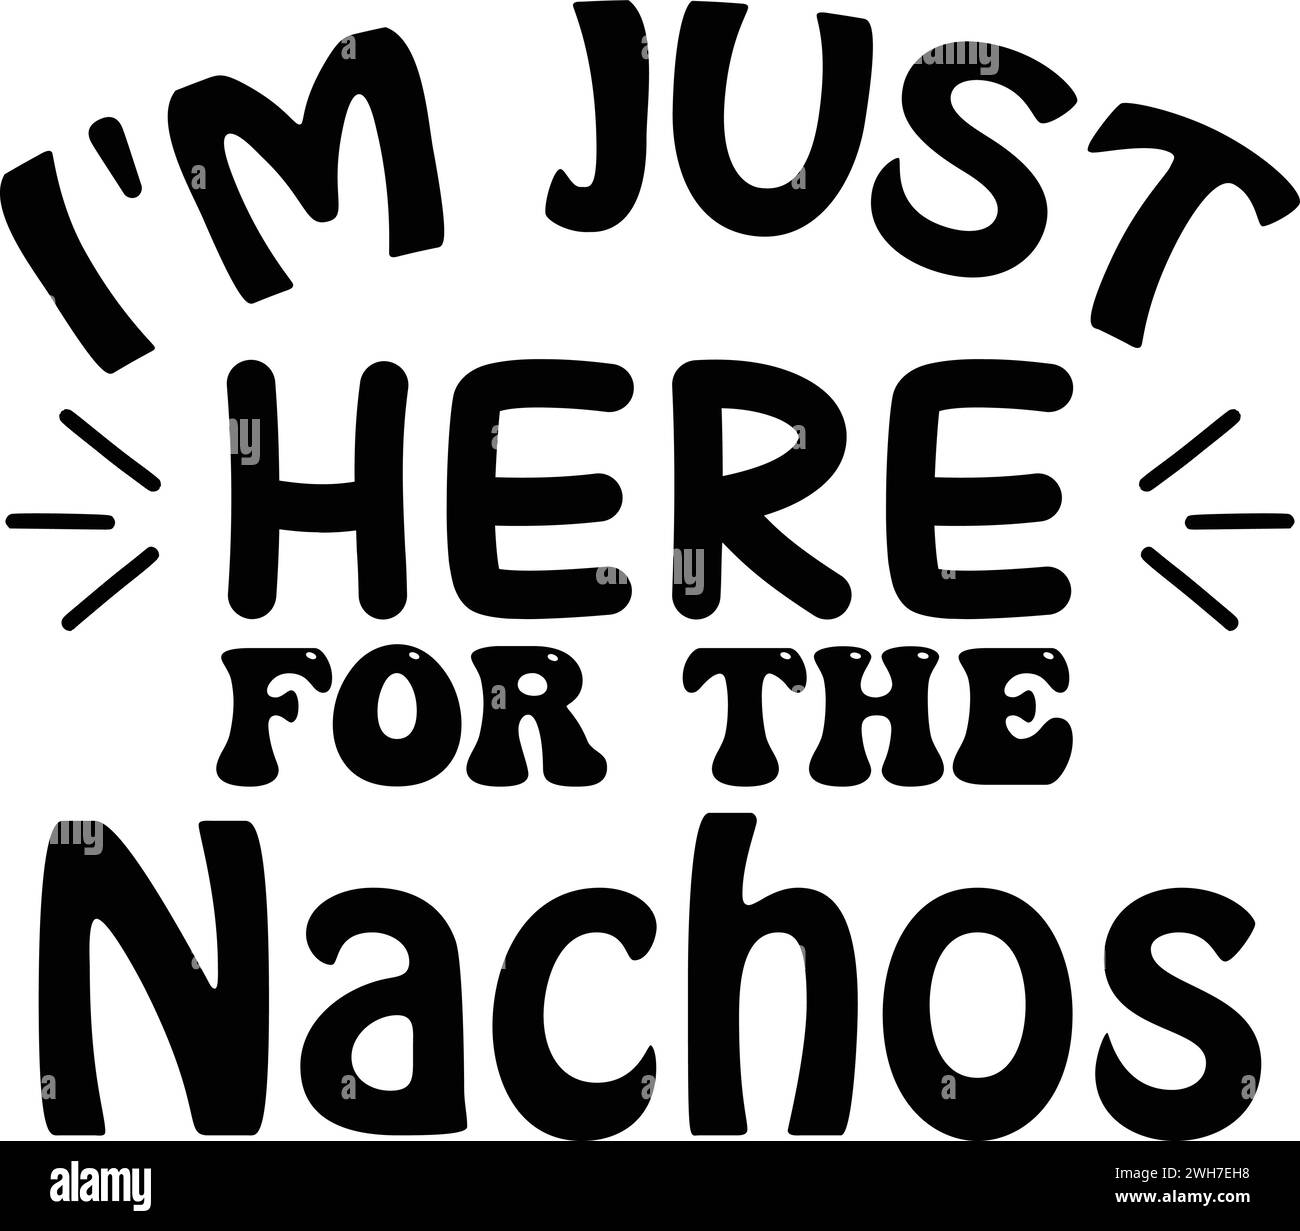 I'm Just Here For The Nachos ,Bowl SVG Design Printable File Stock Vector